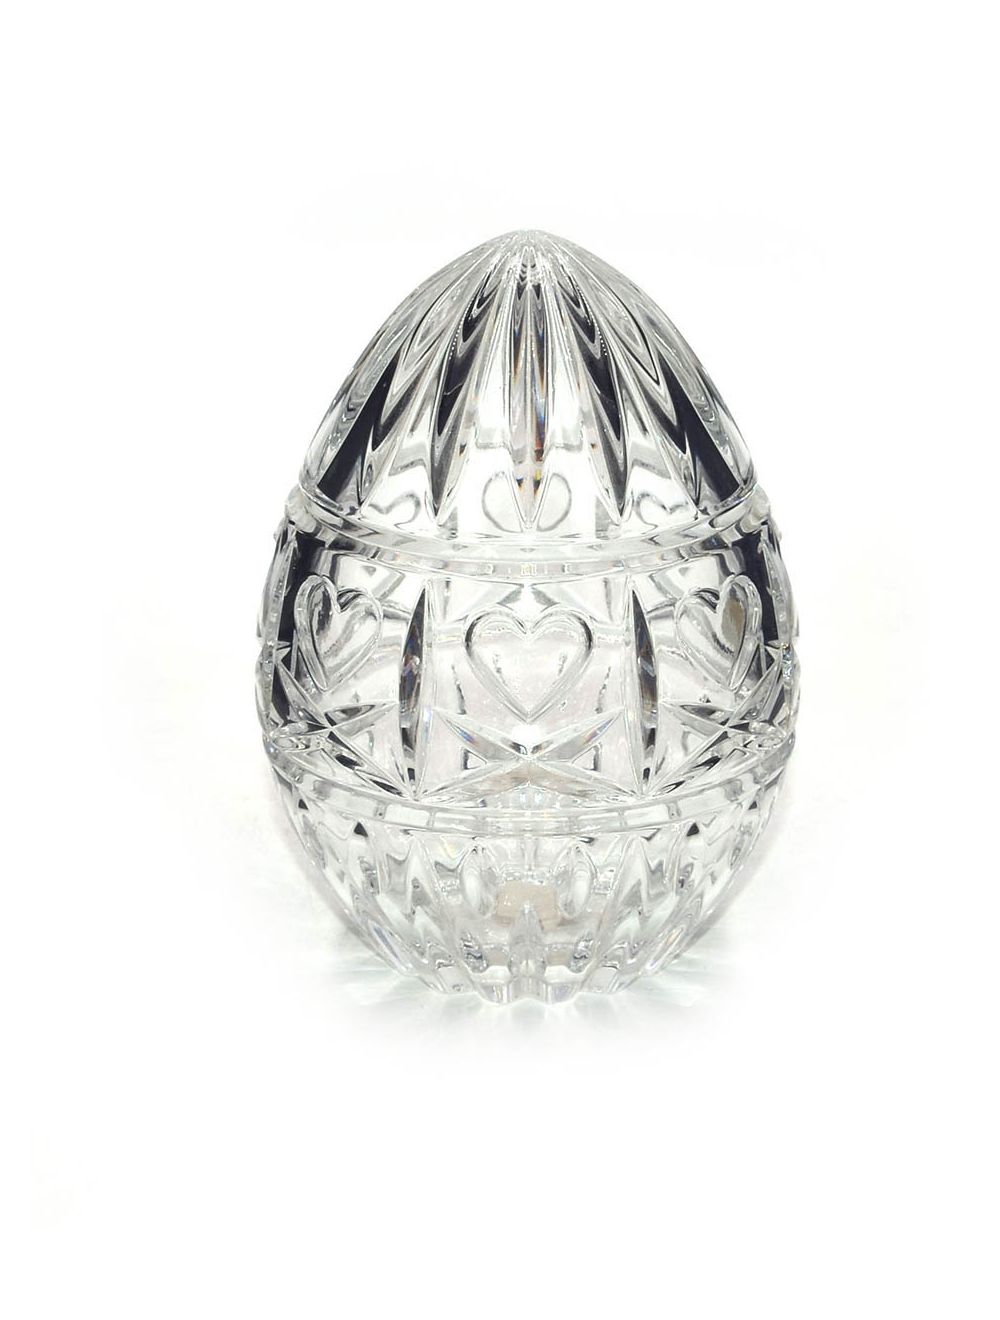 Bohemia Egg-shaped Paperweight 14 cm